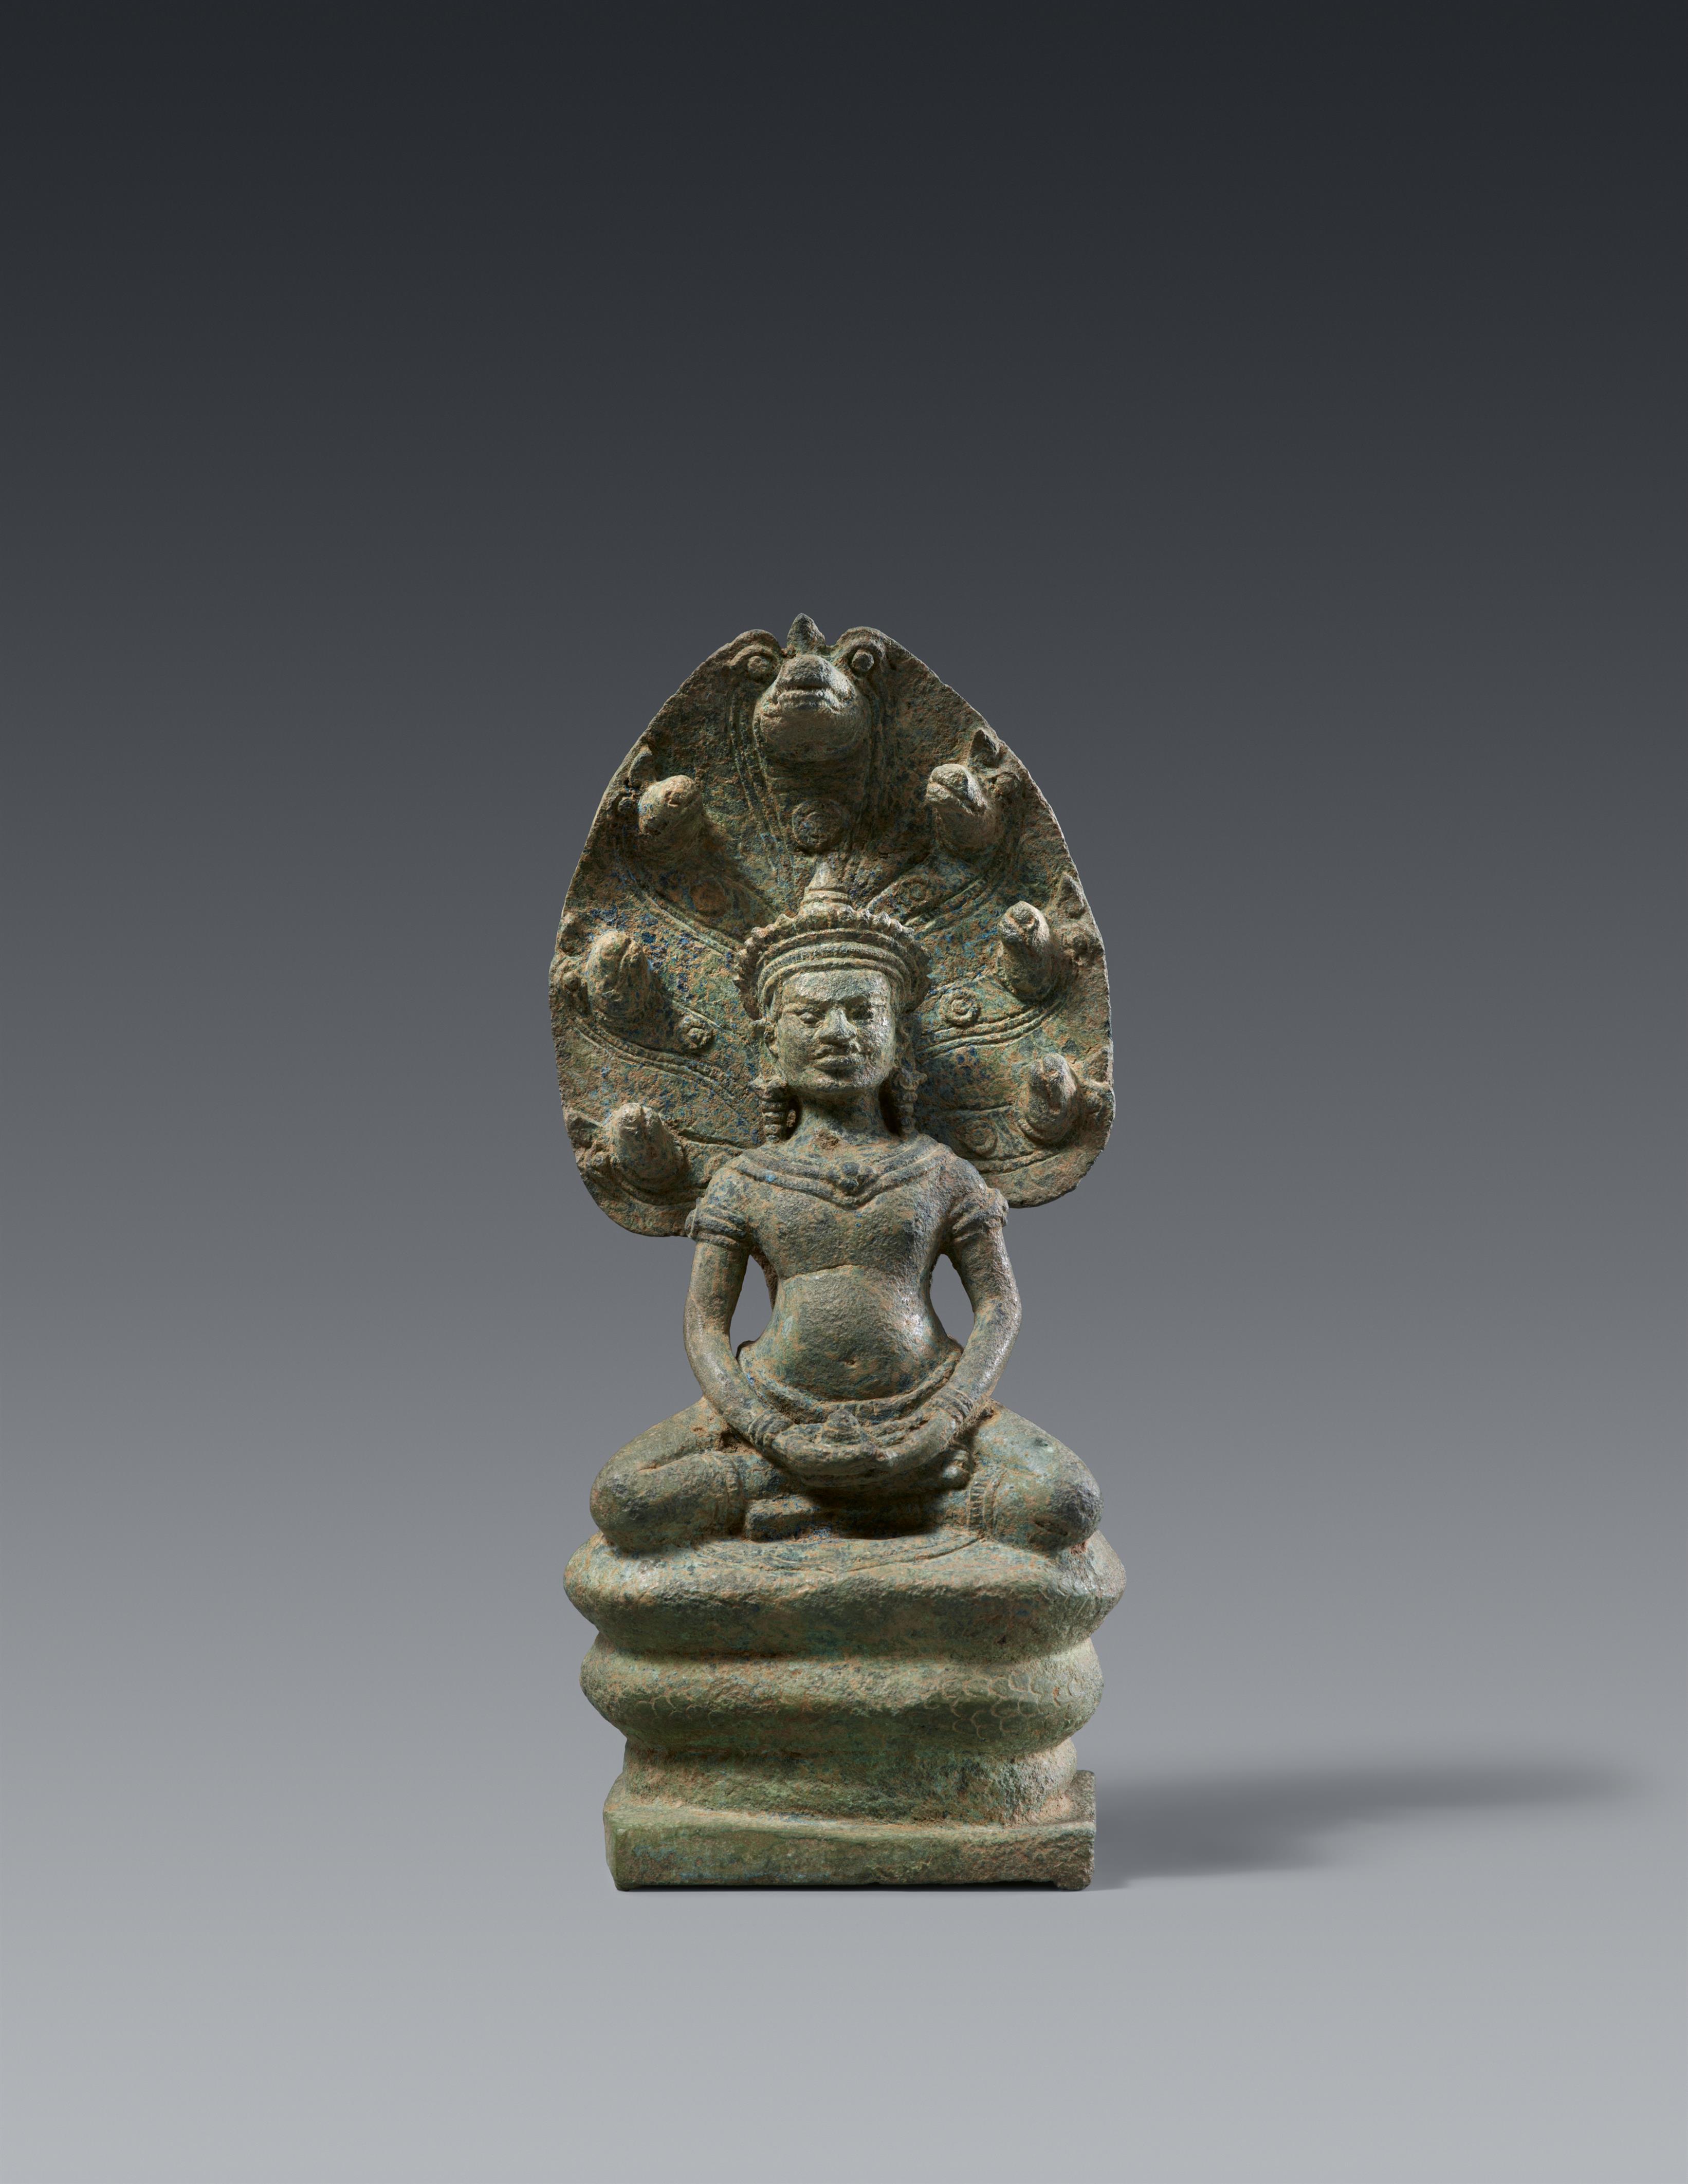 An Angkor-style bronze figure of a naga-protected bejeweled Buddha. Cambodia. Angkor period, 12th/13th century - image-1